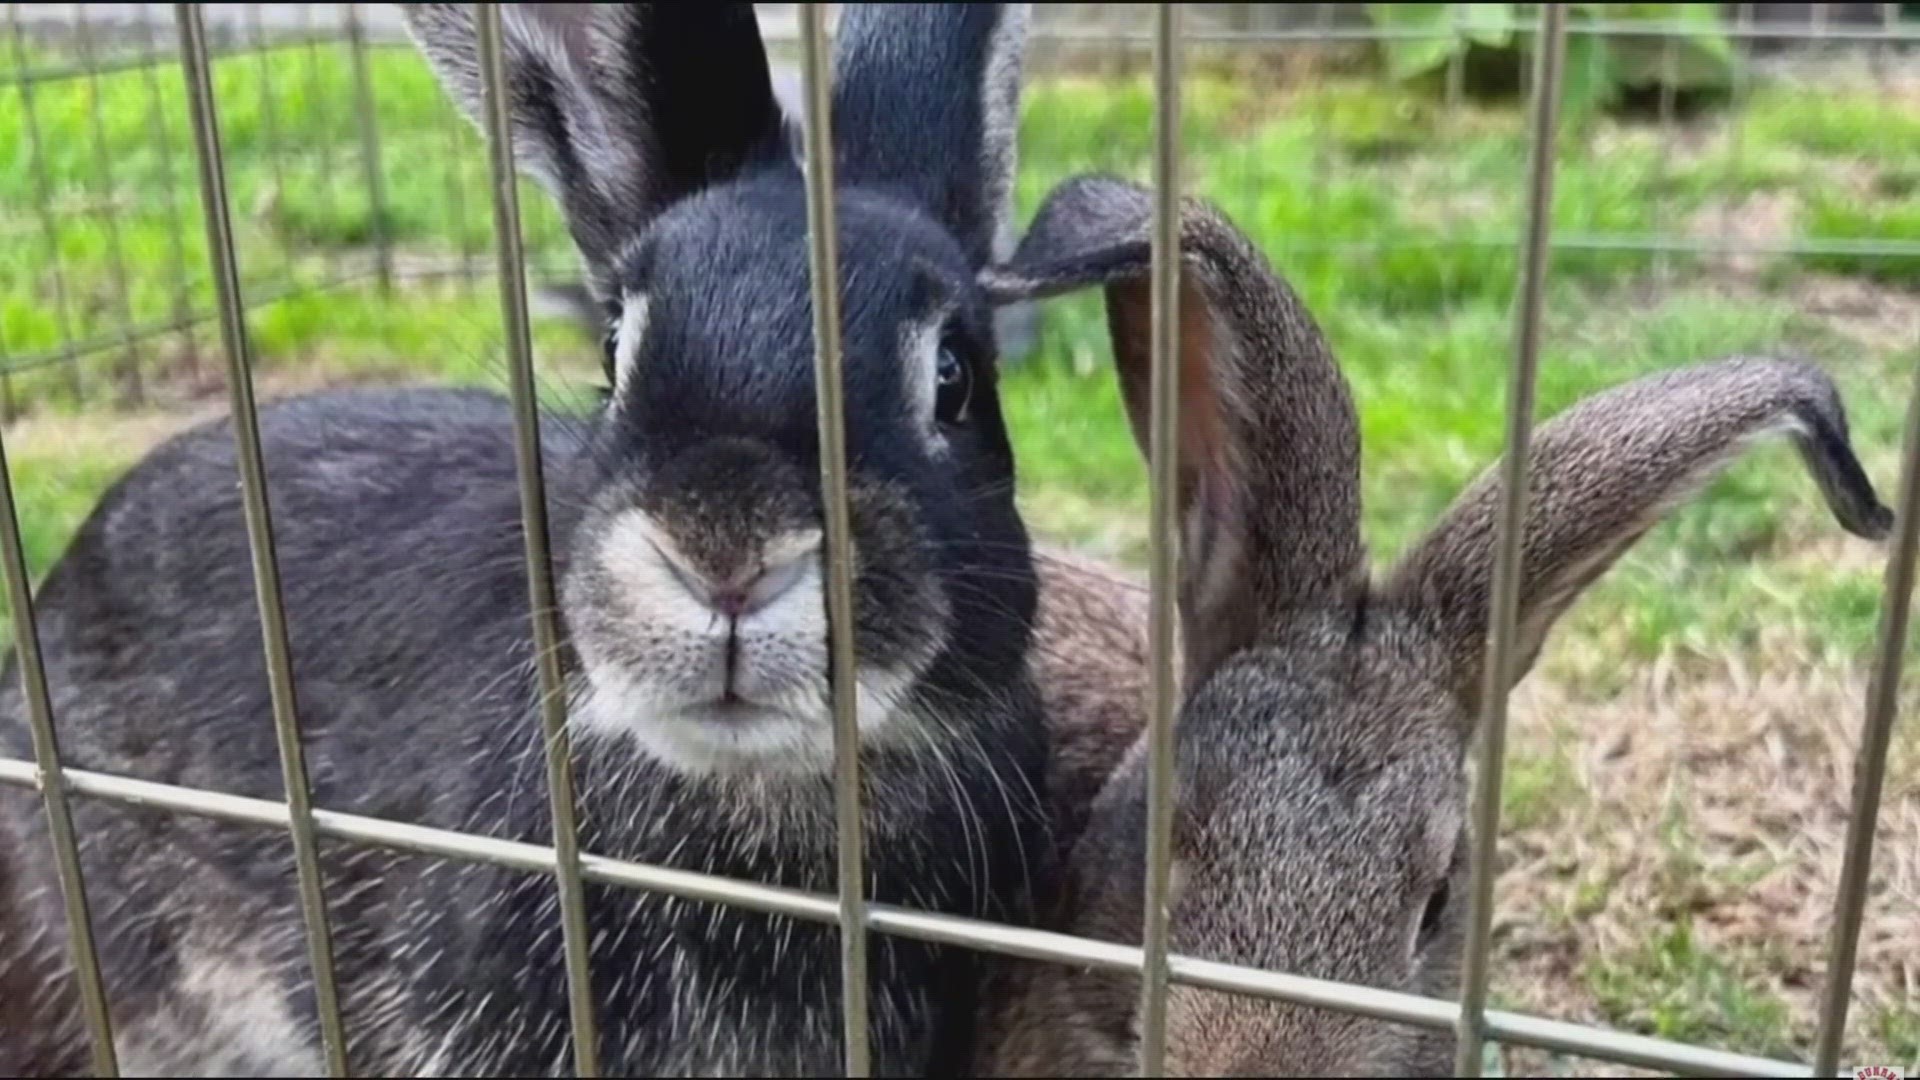 Their love story was interrupted by dozens of sickly bunnies.